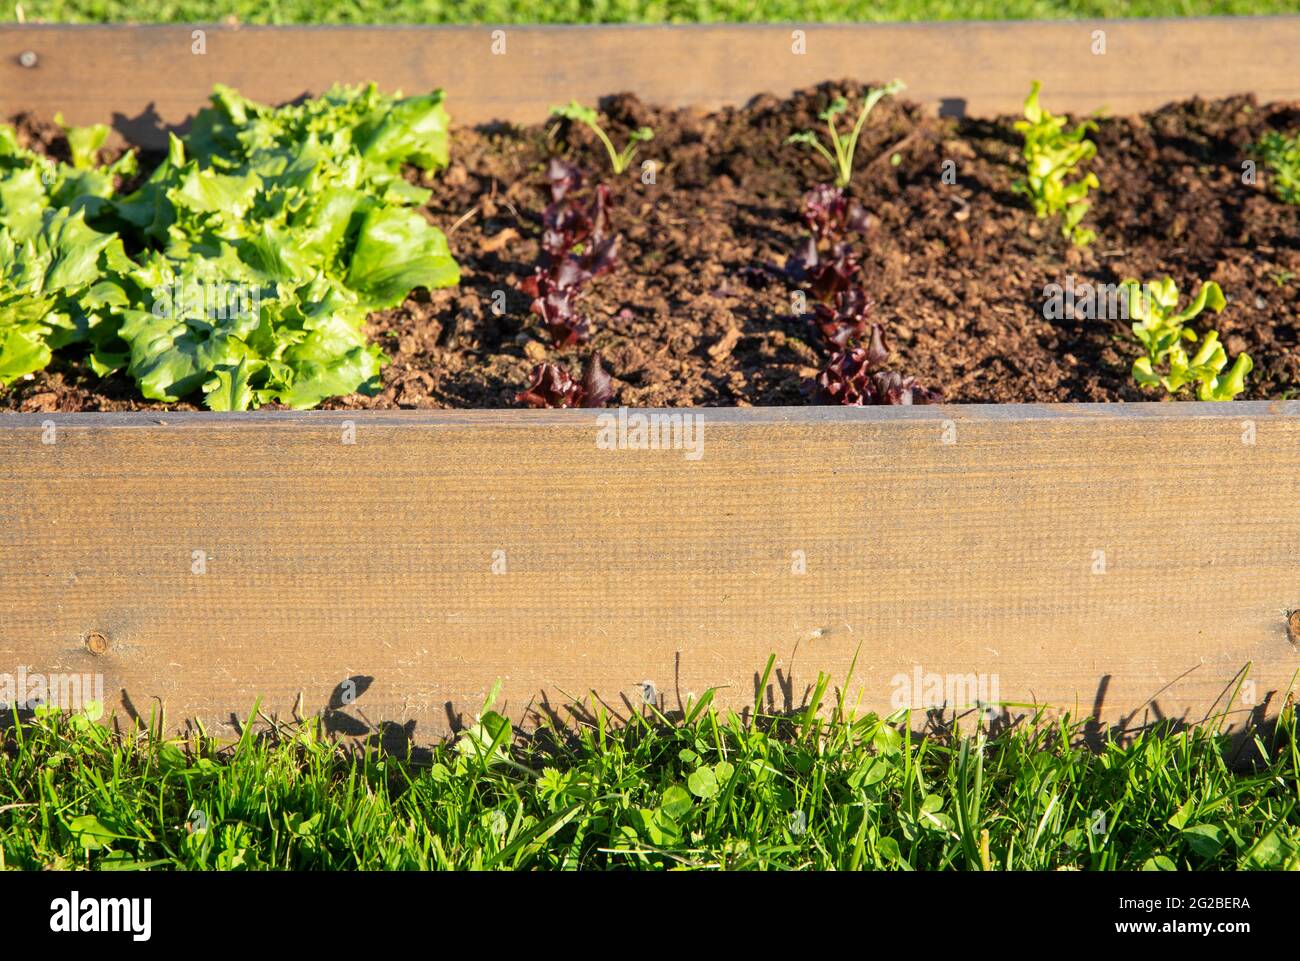 Selective focus on heat treated wood raised garden bed. Boxes filled with soil and with various vegetable plants growing inside small field. Stock Photo